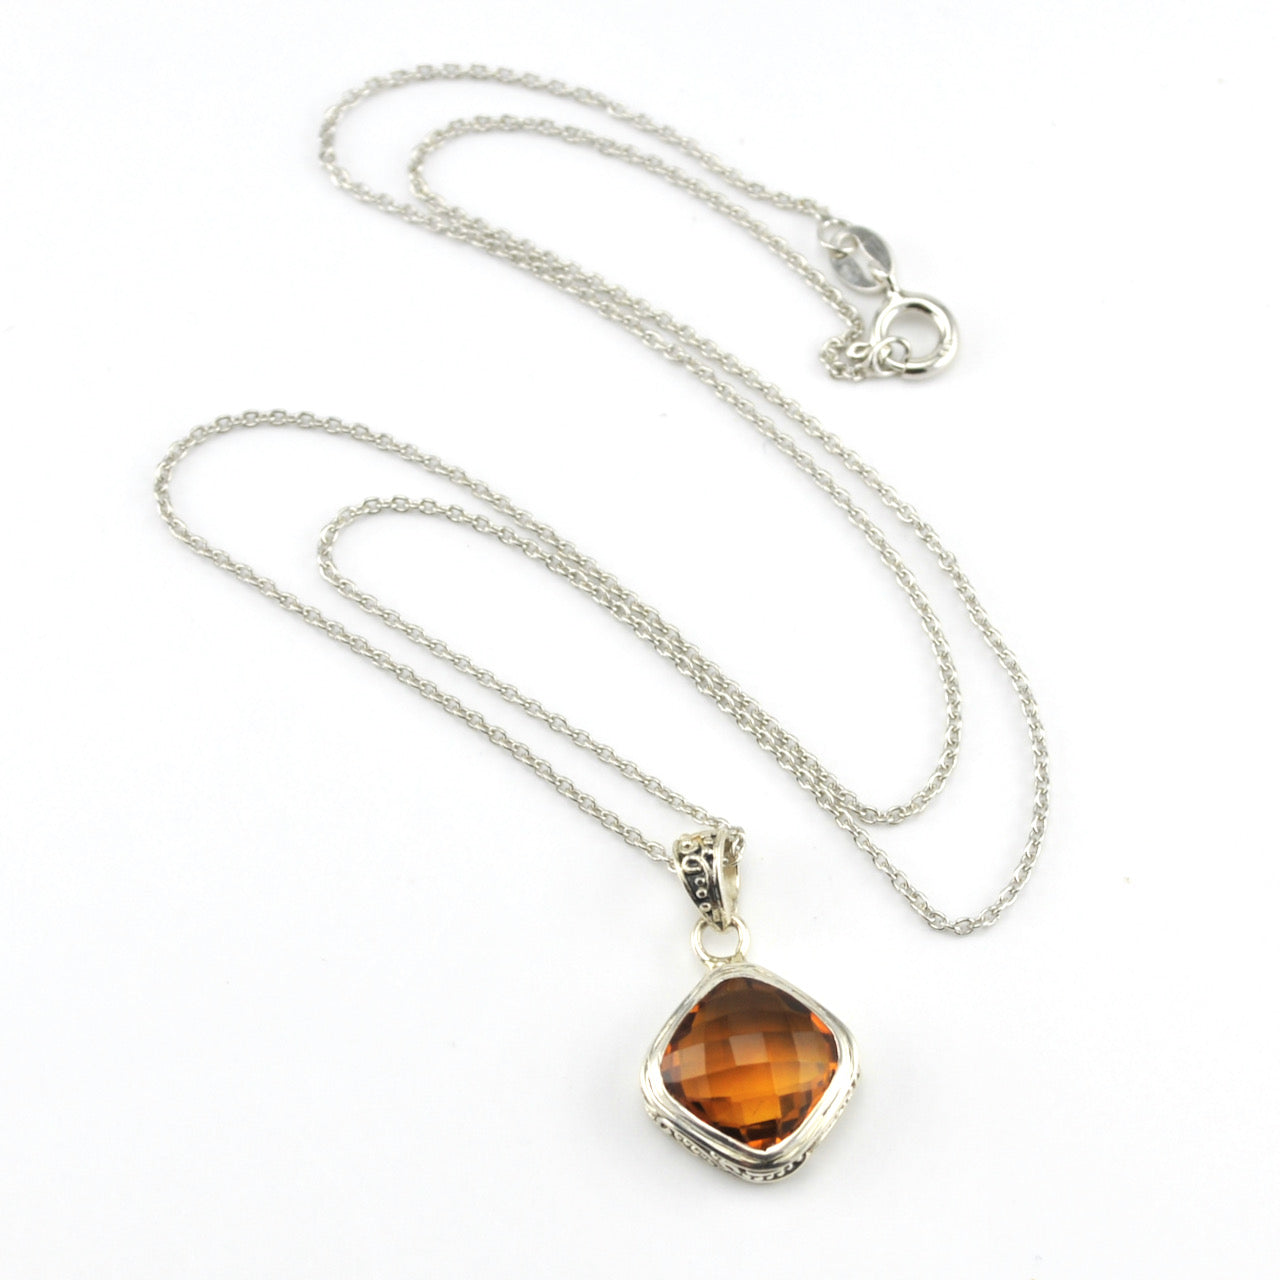 Silver Citrine 10mm Offset Square Bali Necklace